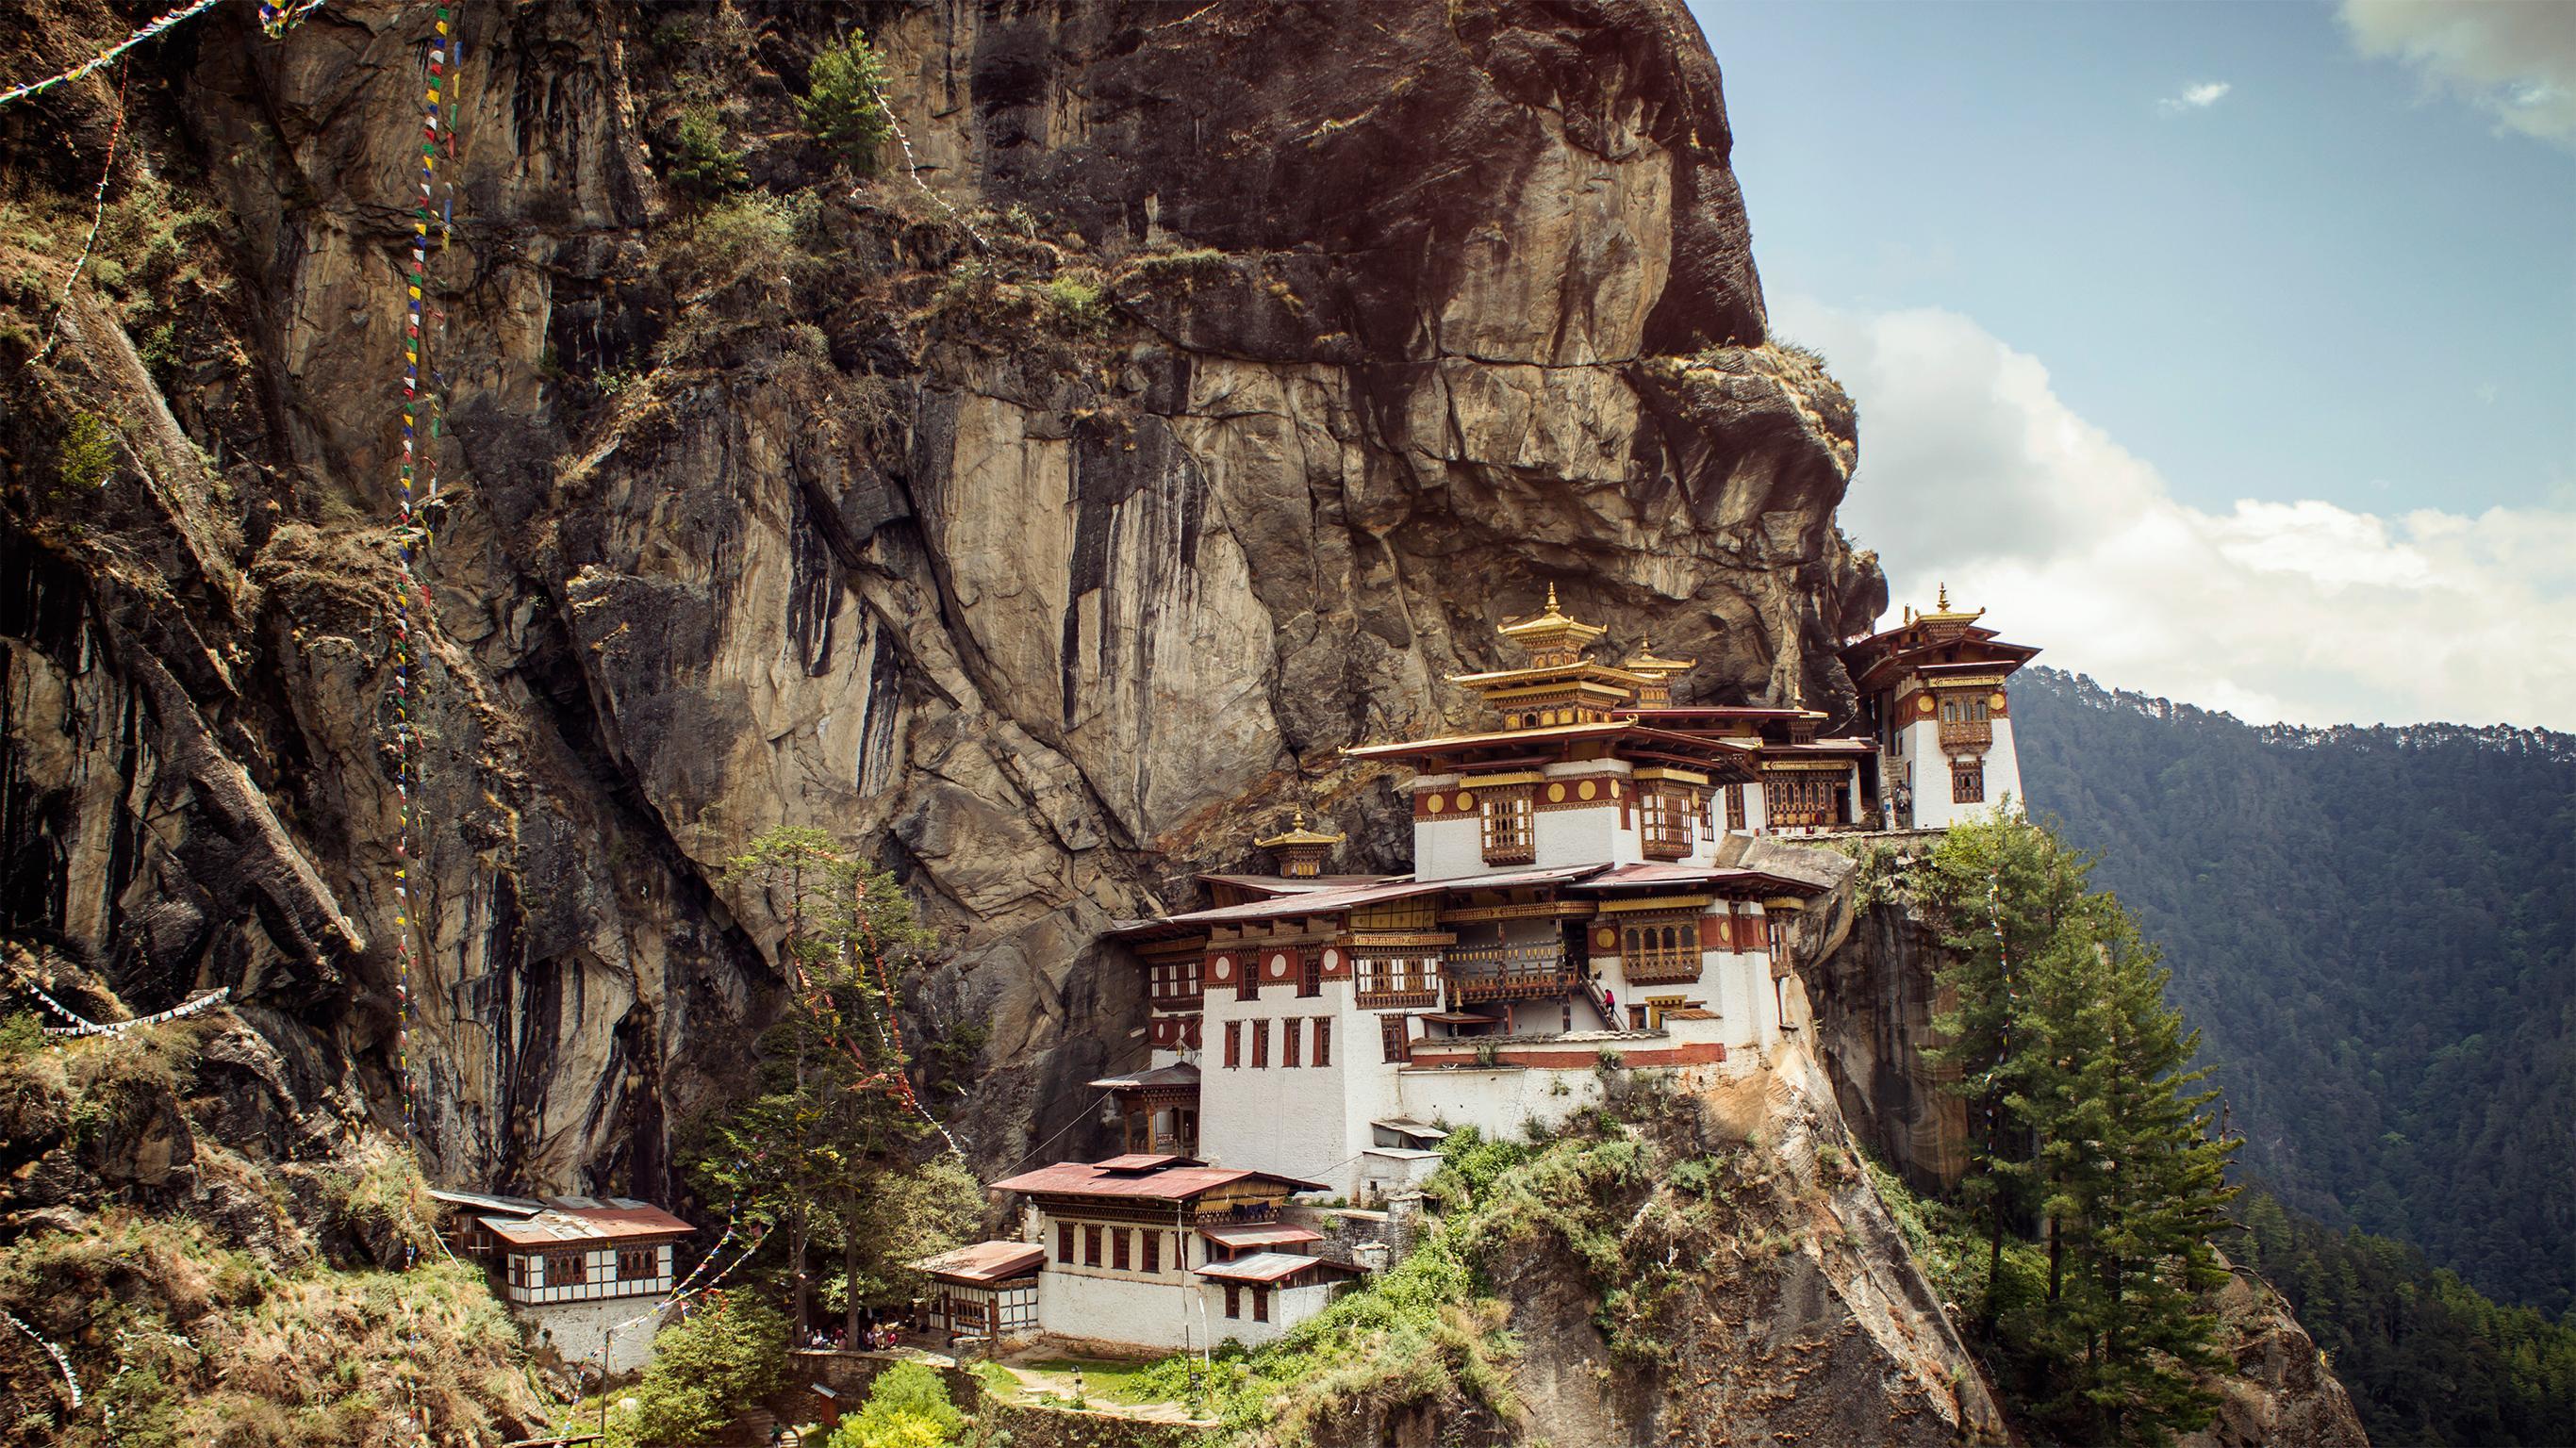 From Fortresses to Temples: 5 Impressive Sights of Bhutan